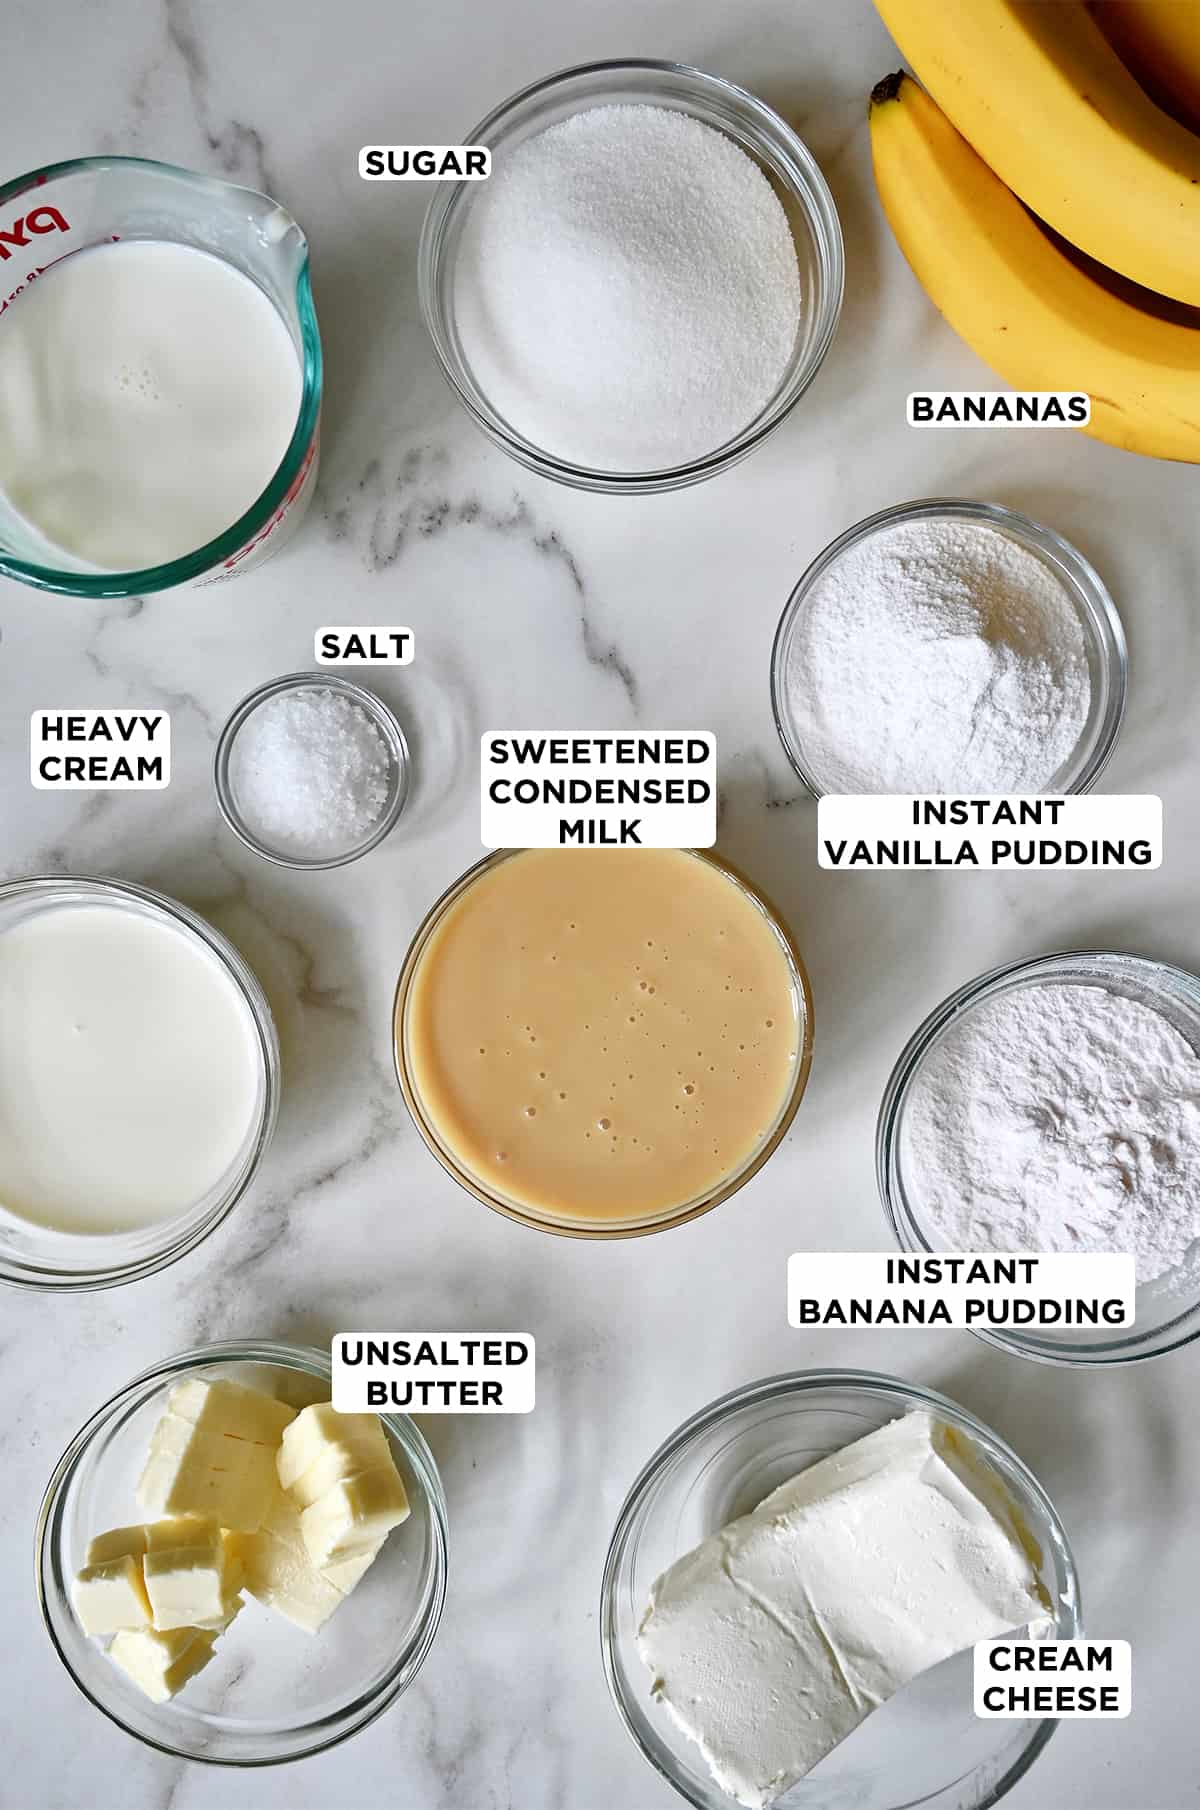 Various sizes of glass bowls containing banana pudding and salted caramel ingredients, including heavy cream, sugar, instant vanilla and banana puddings, salt, sweetened condensed milk, butter, cream cheese and whole milk. Two bananas are next to the bowls.